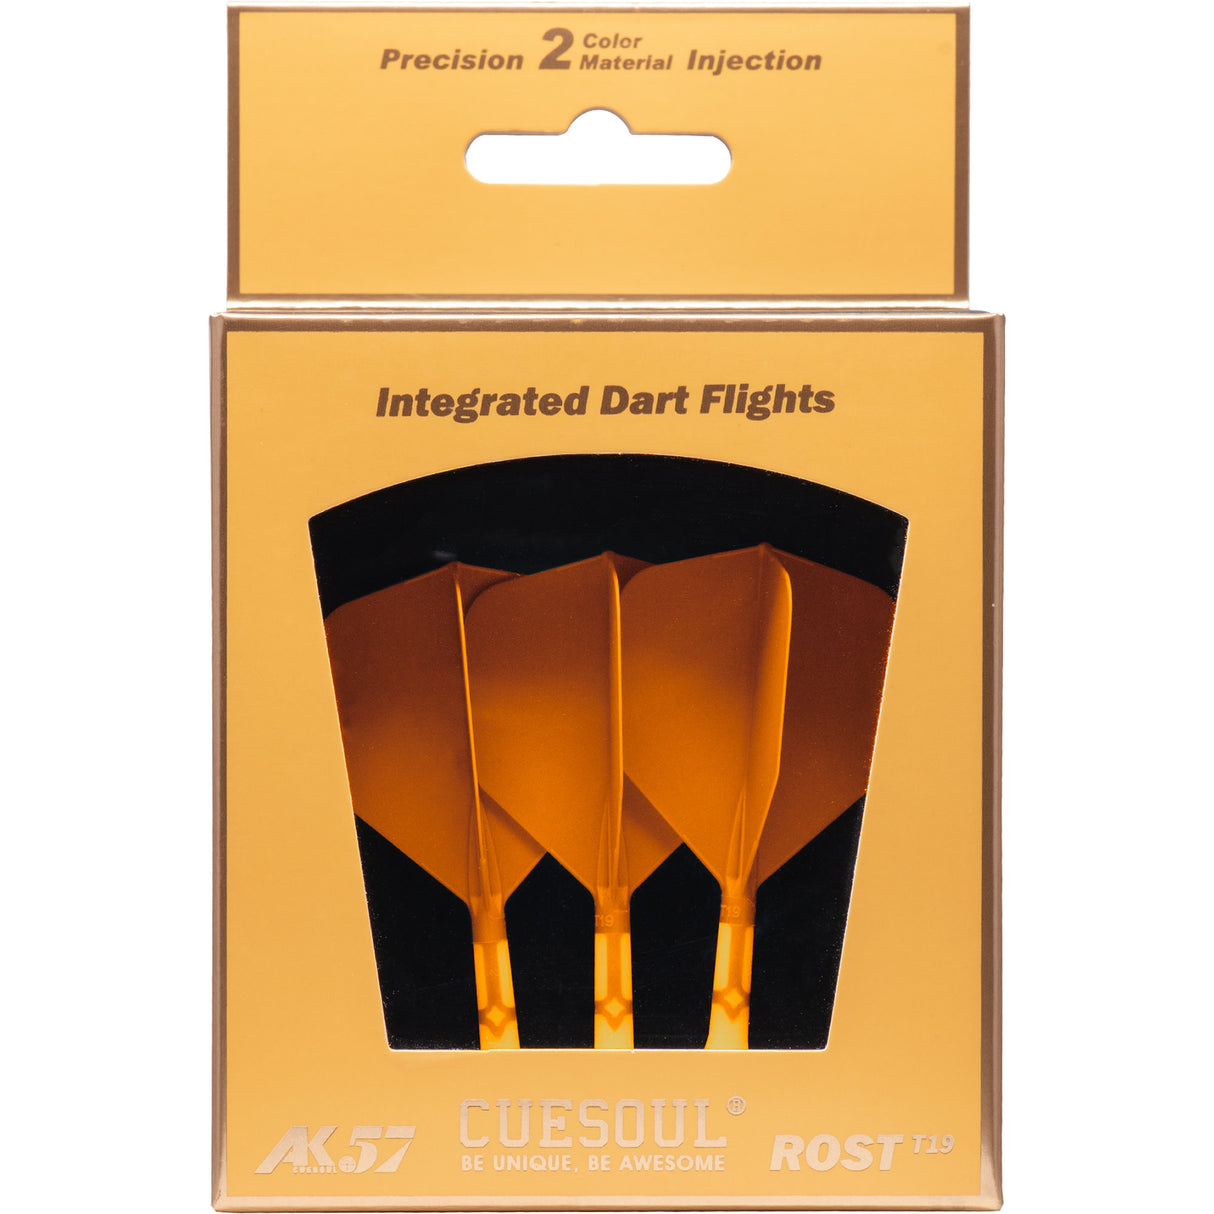 *Cuesoul Rost T19 Integrated Dart Shaft and Flights - Big Wing - White with Orange Flight